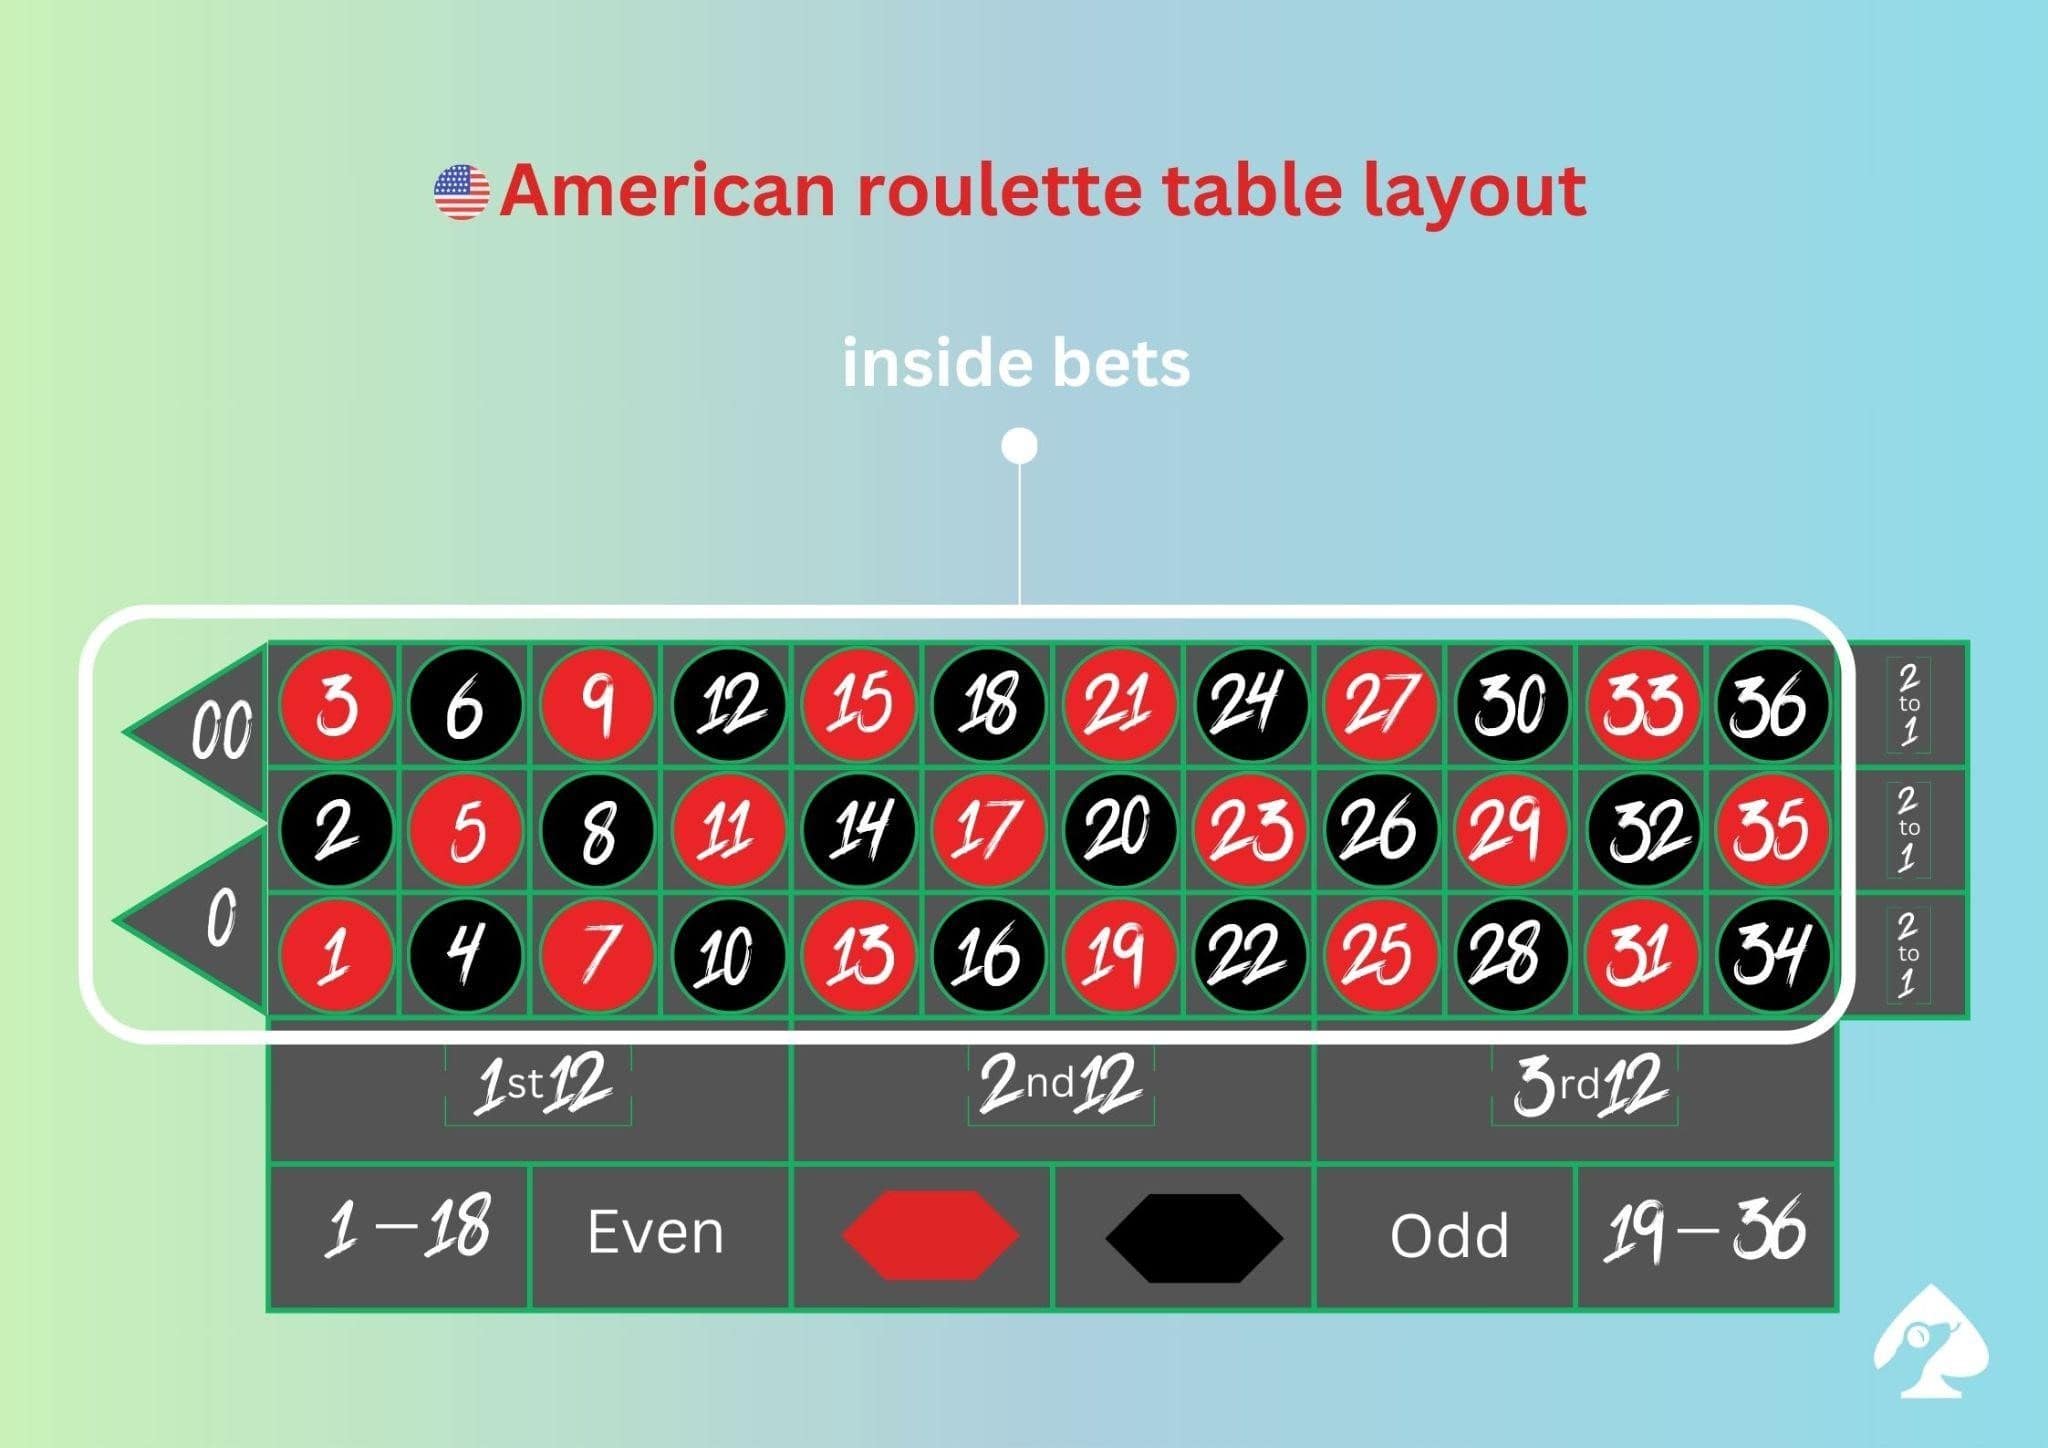 Roulette inside bets layout